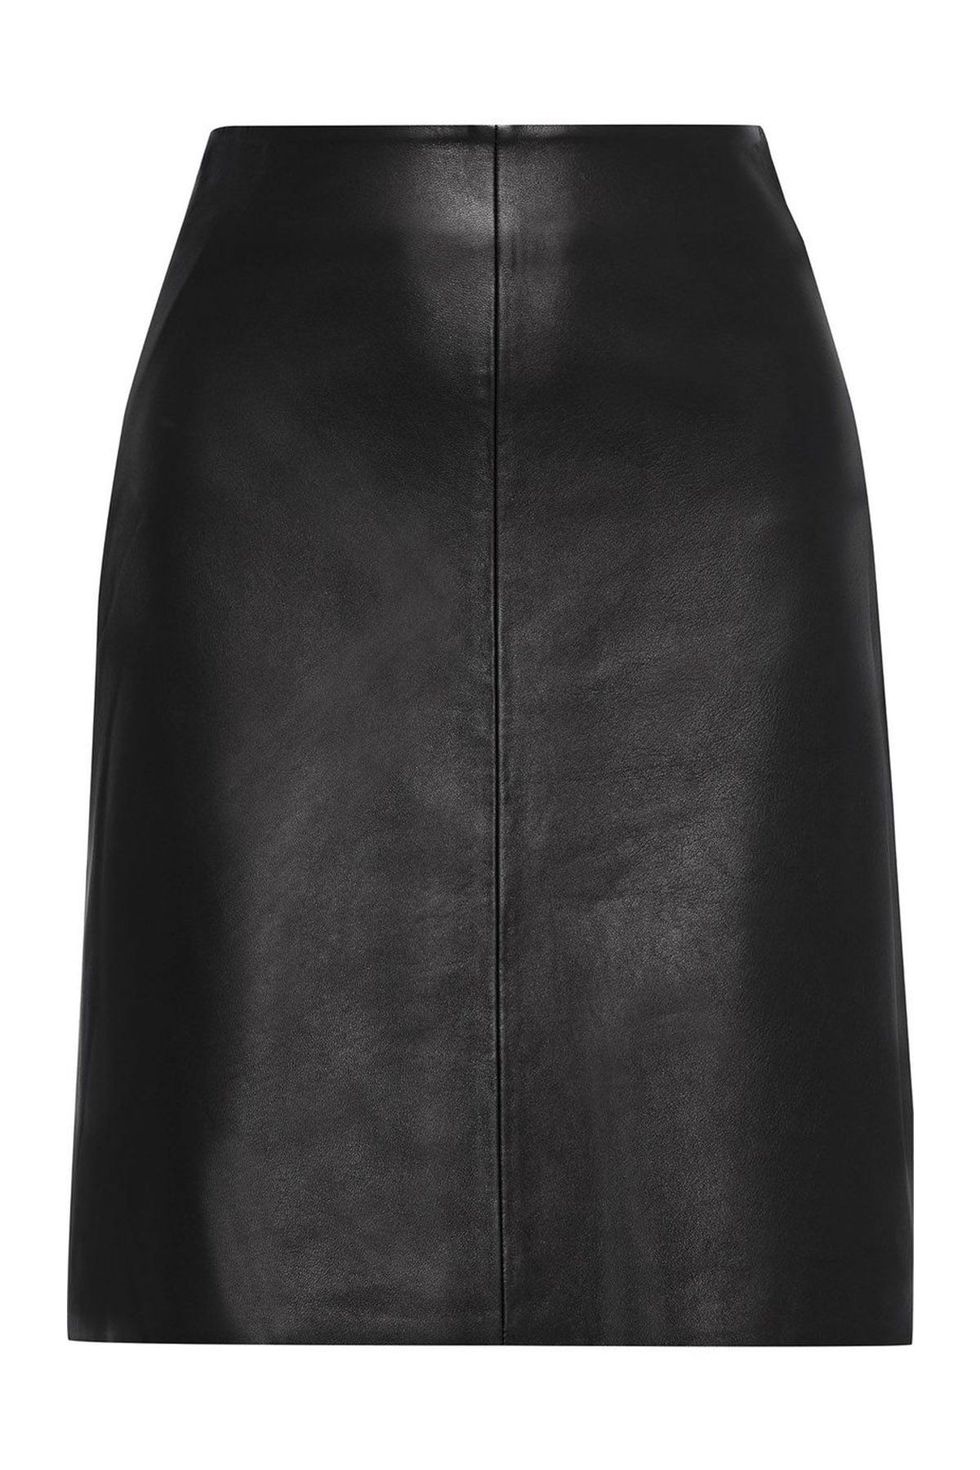 Here's how I wear a faux leather midi skirt — Covet & Acquire